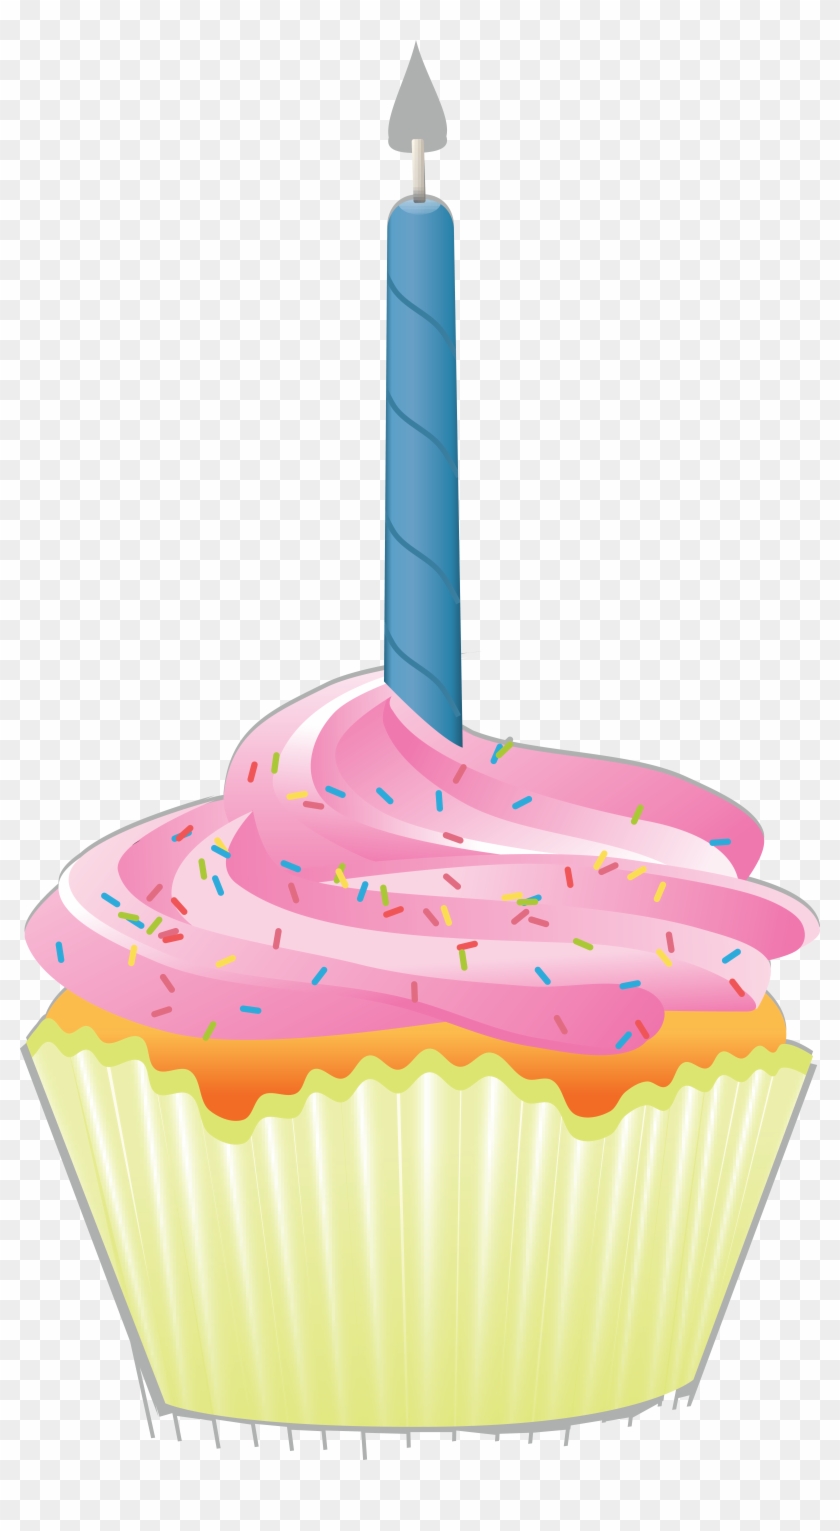 Free Clipart Of A First Birthday Cupcake With A Candle.